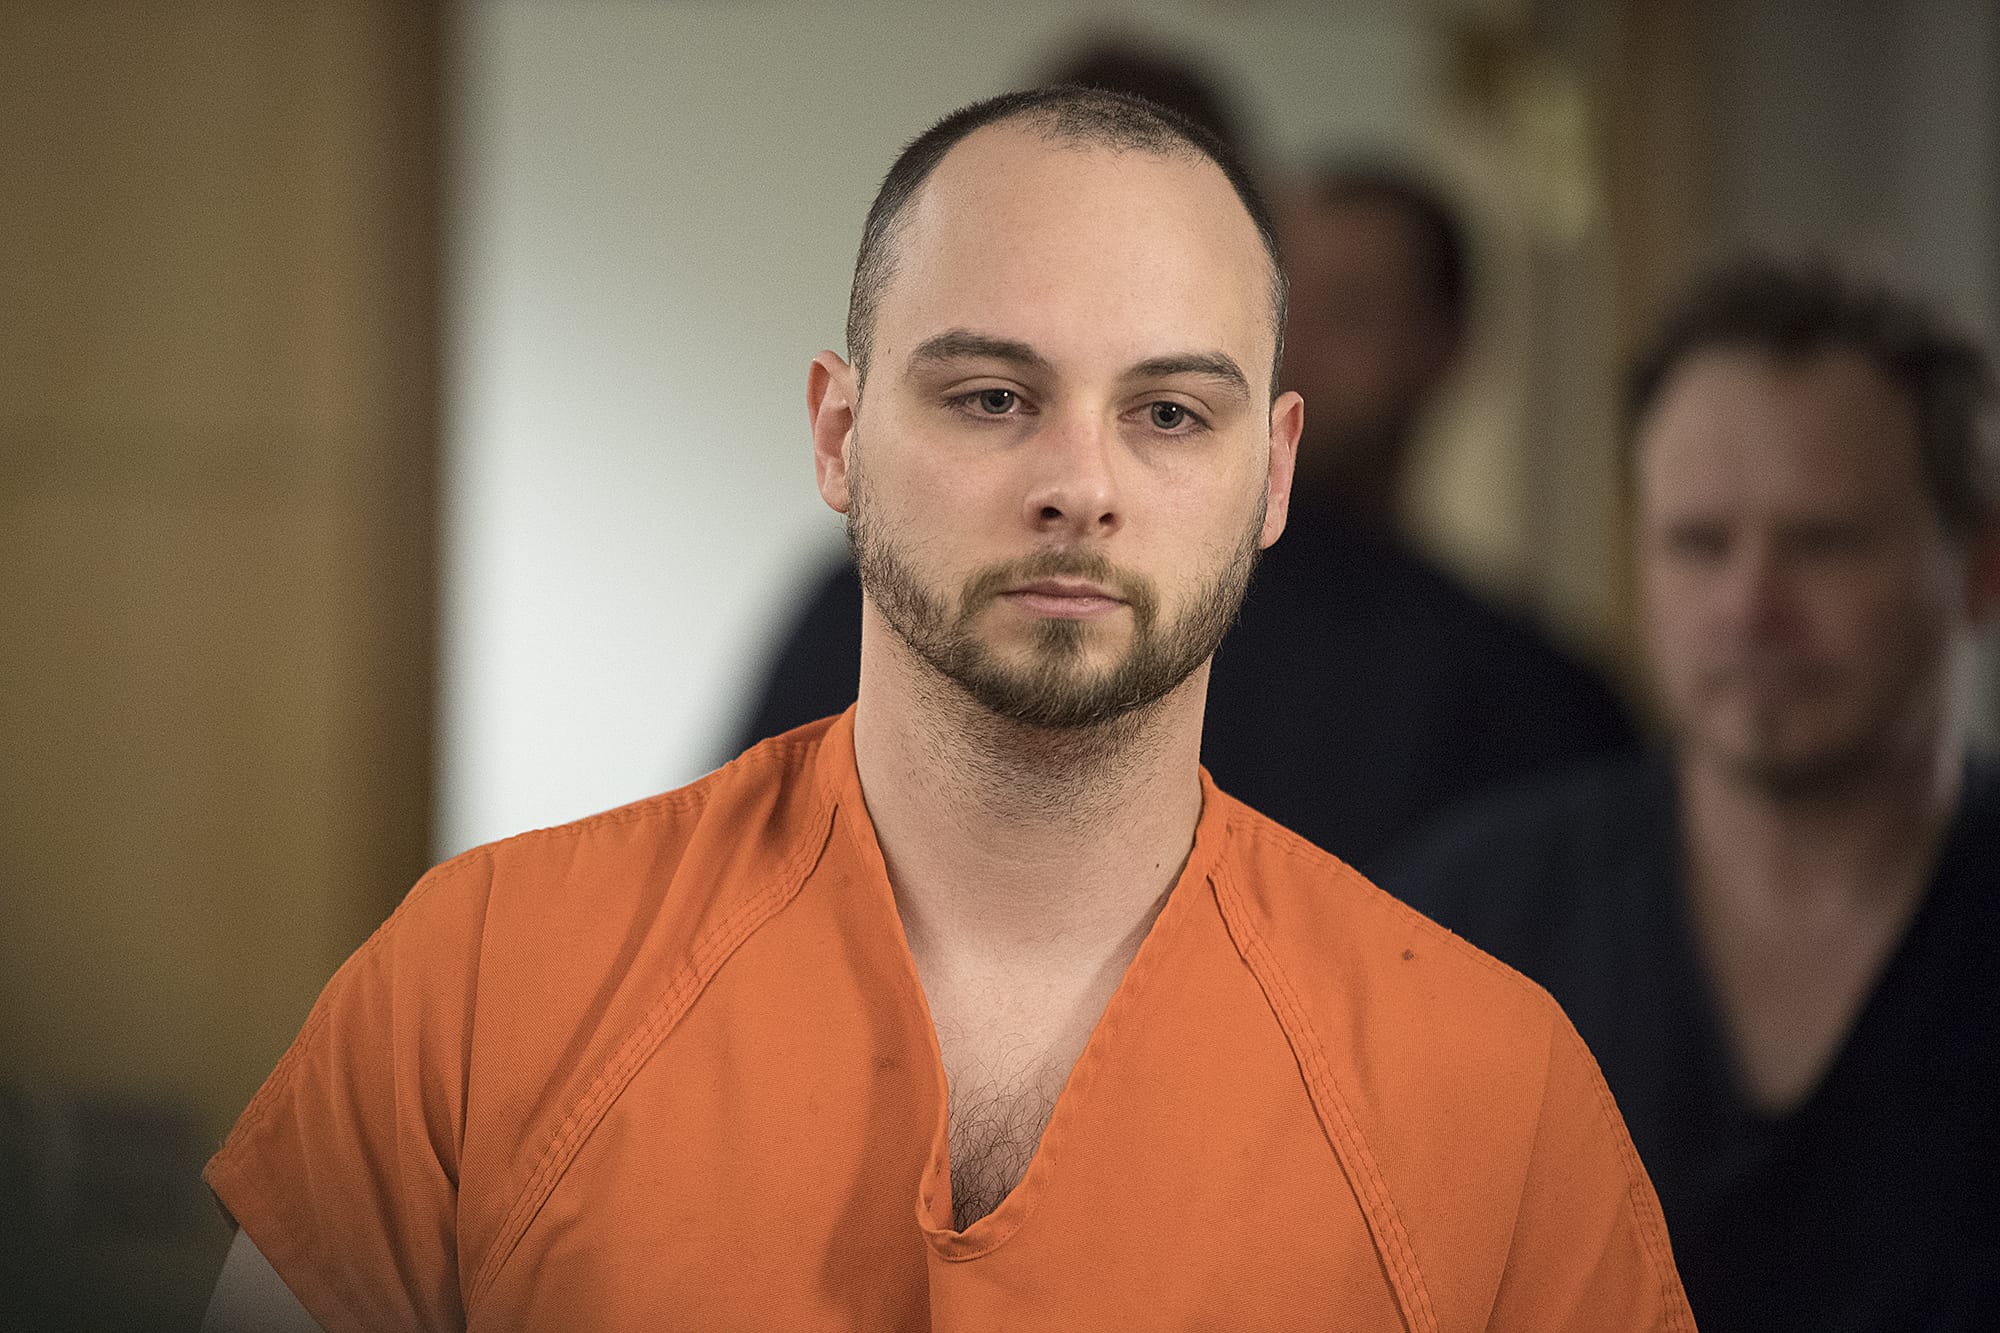 Samuel Laughlin makes a first appearance on suspicion of attempted first-degree murder, first-degree assault and second-degree malicious mischief in Clark County Superior Court on June 9, 2019.